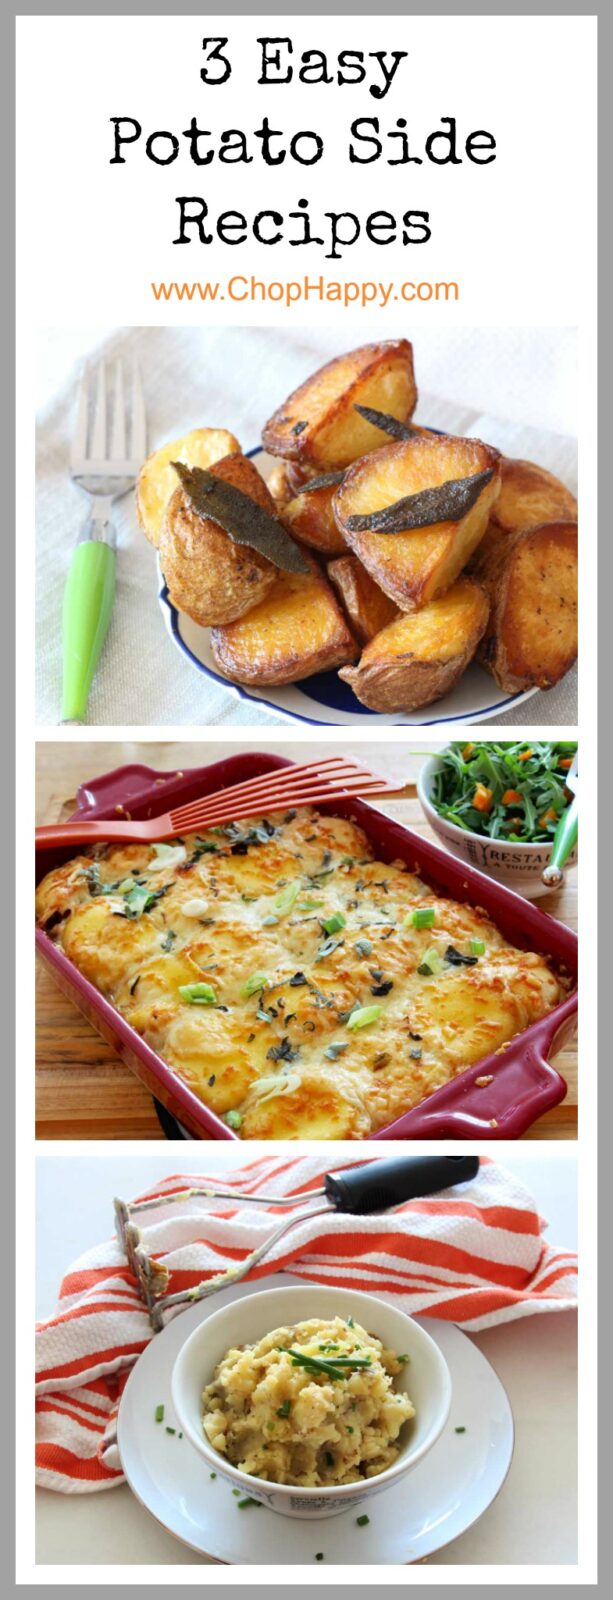 3 Easy Potato Side Recipes - that are perfect for Thanksgiving, Christmas, Hanukkah, or a comfort food dinner. Easy roasted potatoes, mashed potato lasagna, and mashed potatoes. www.ChopHappy.com #potato #HolidayRecipe